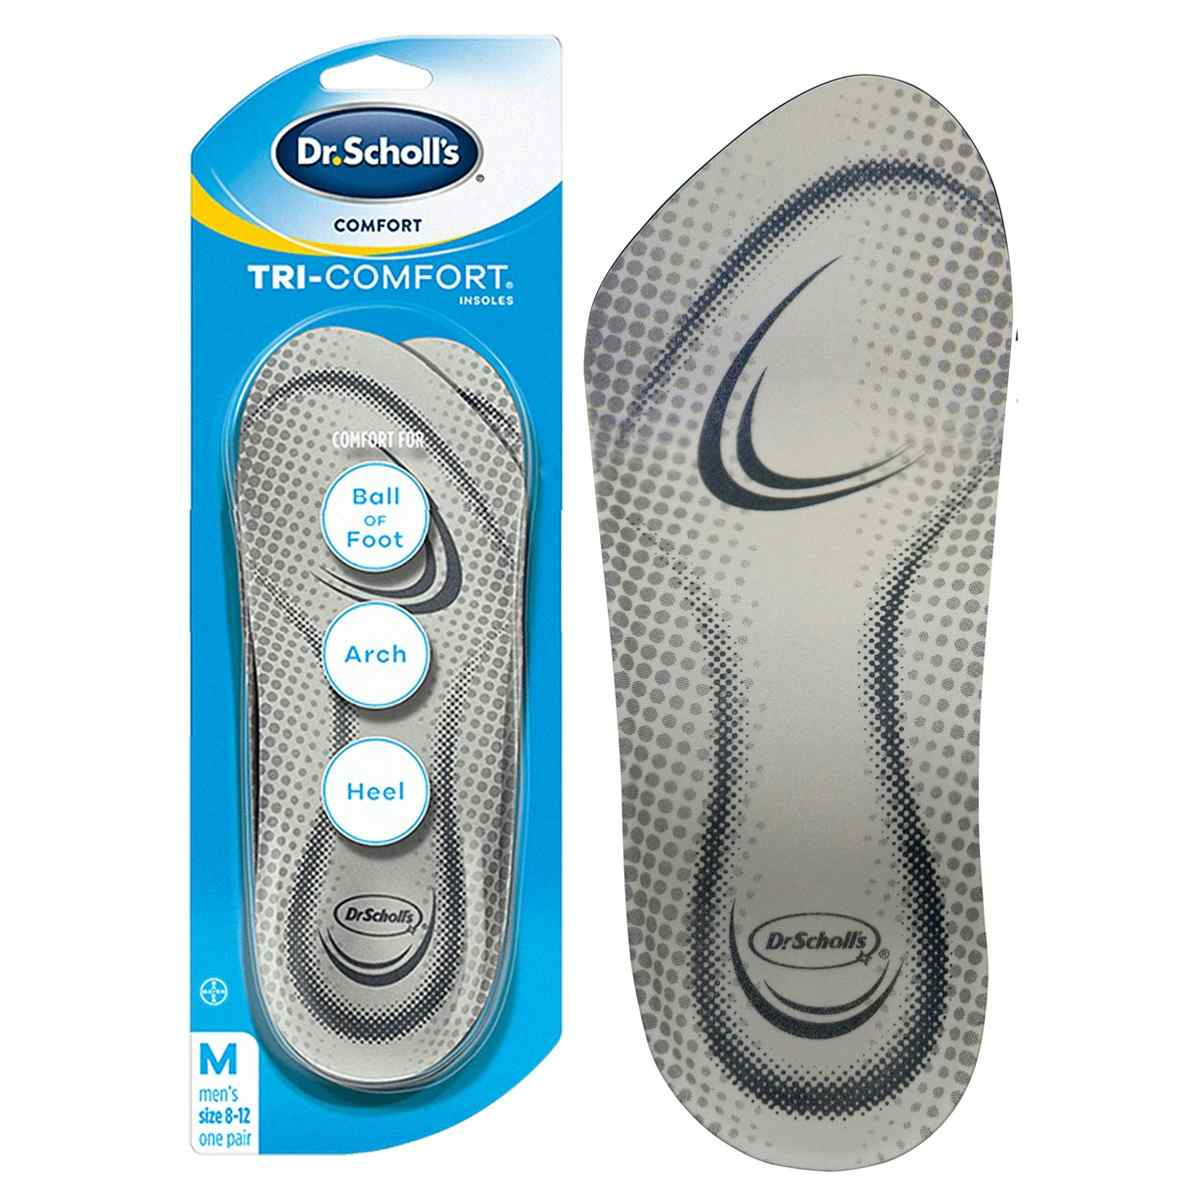 Dr. Scholl's Comfort Tri-Comfort Shoe Insoles, 85284622, Male (Size 8-12) - Pack of 2